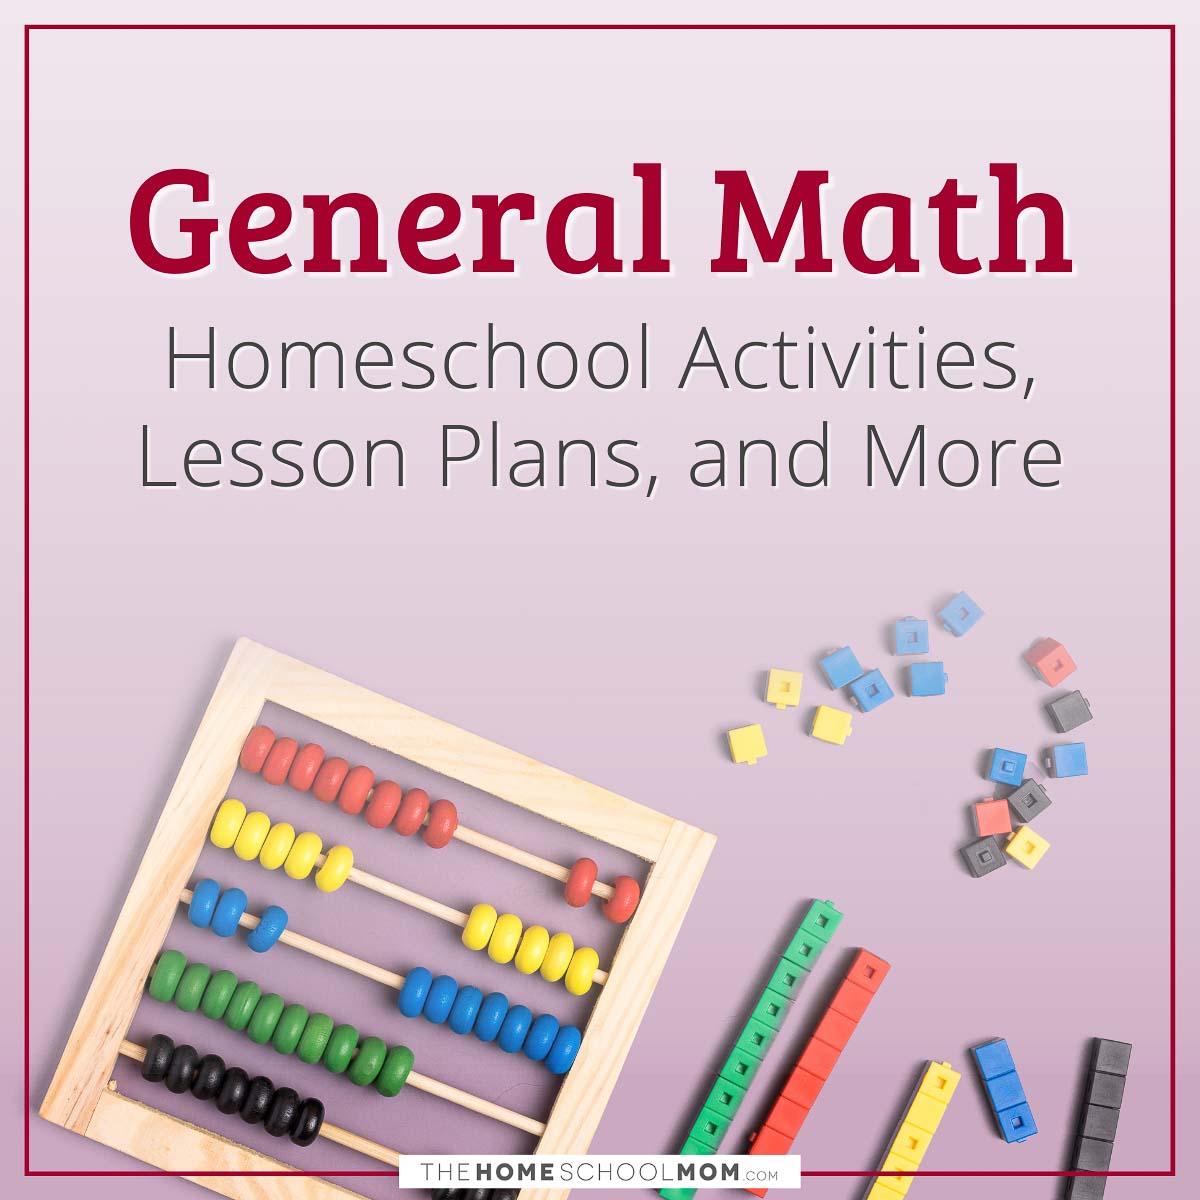 General Math Homeschool Activities, Lesson Plans, and More from TheHomeschoolMom.com